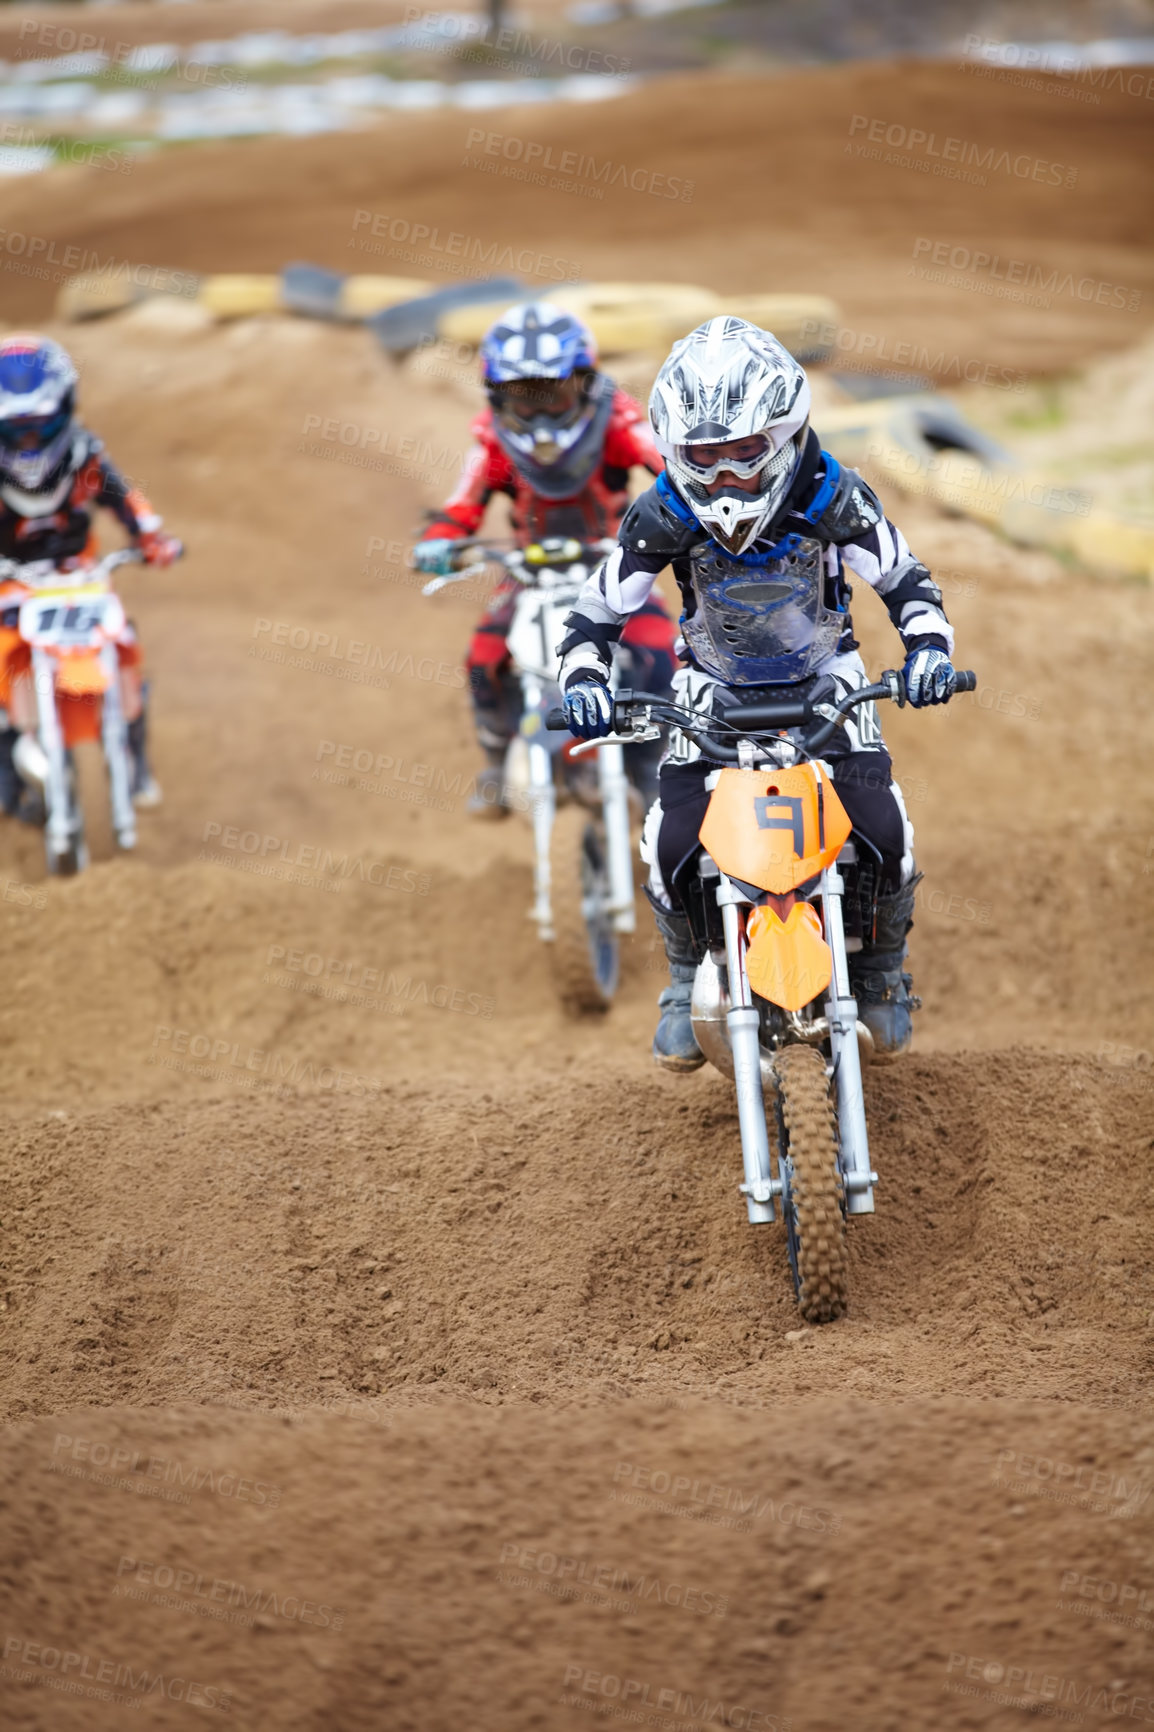 Buy stock photo Three motocross riders riding in close proximity to each other